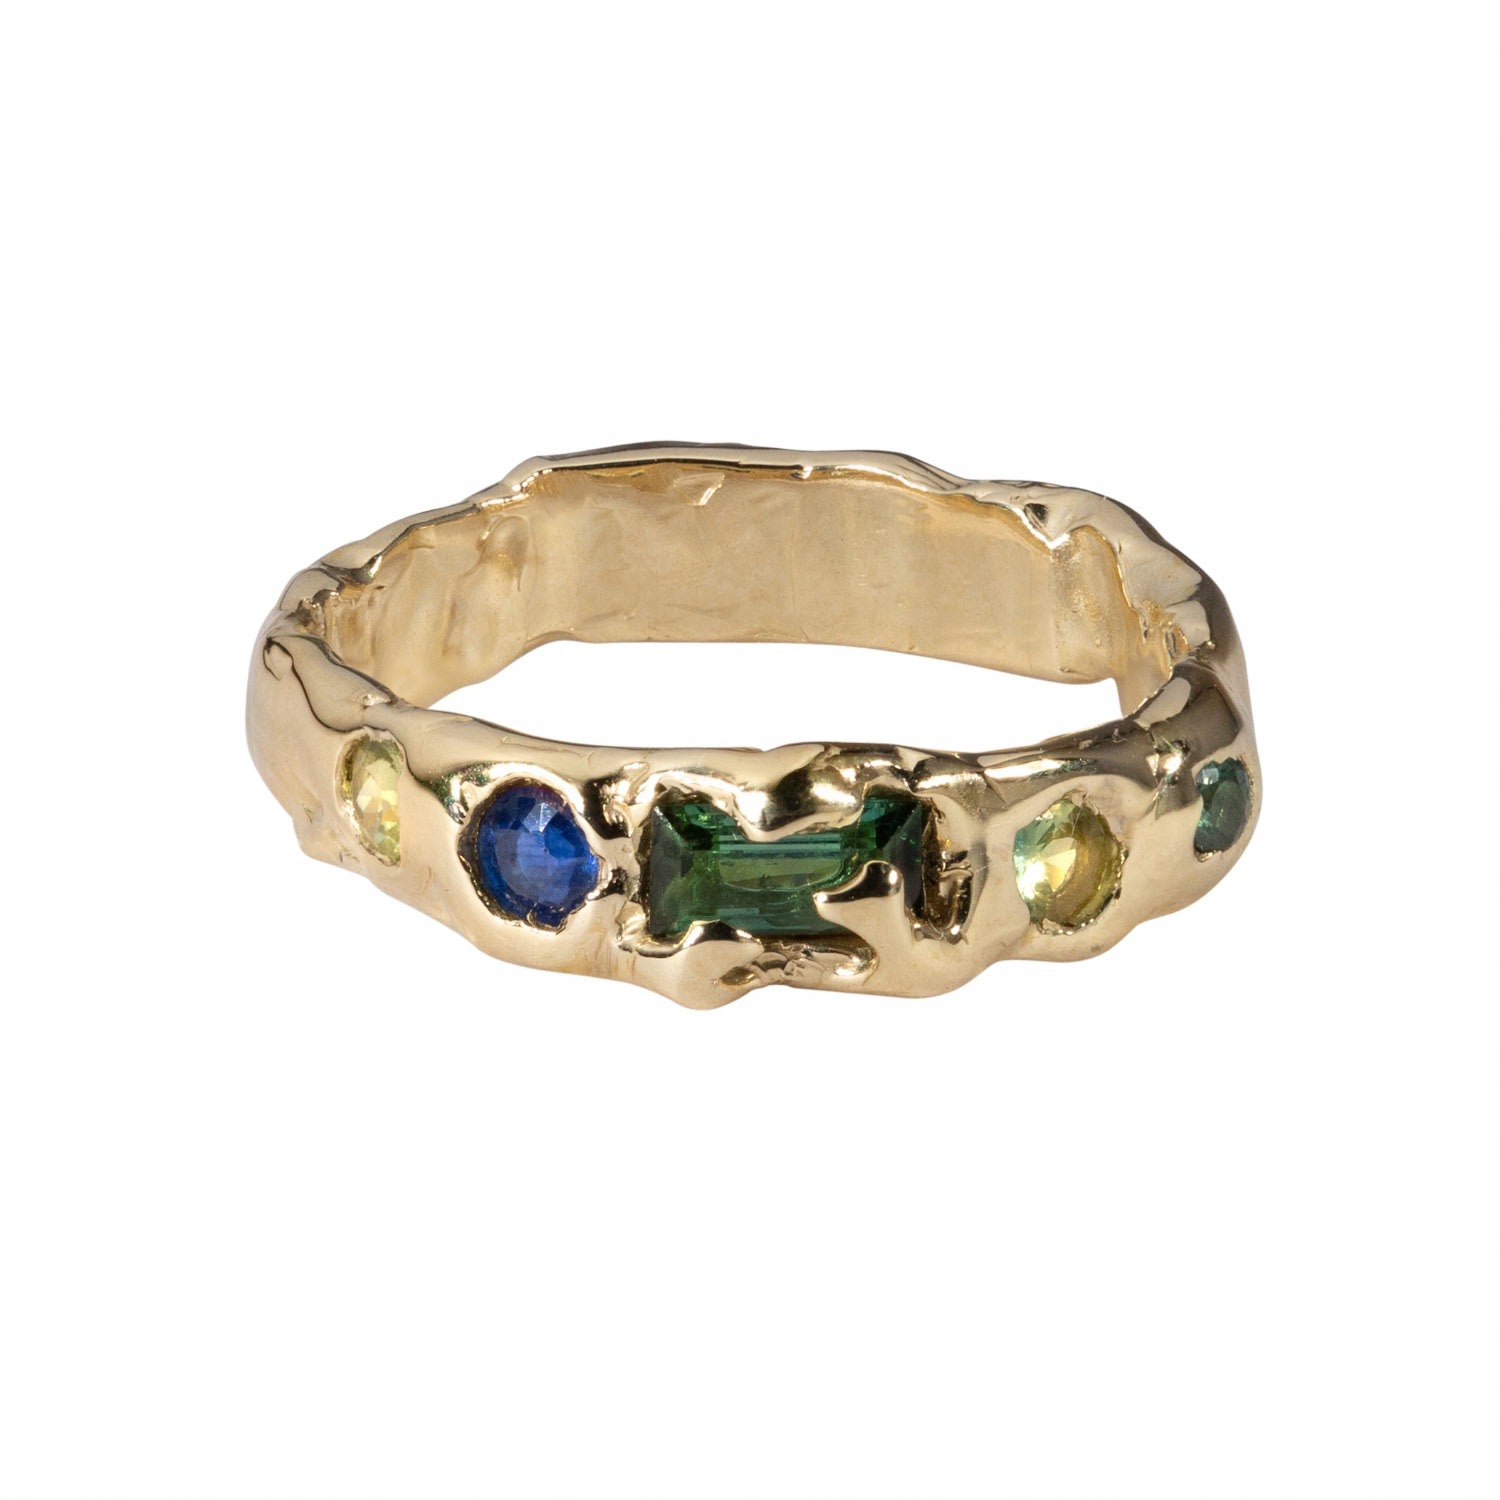 Women’s Gold / Green / Blue Gold Band With Sapphires And A Tourmaline Sade Blake